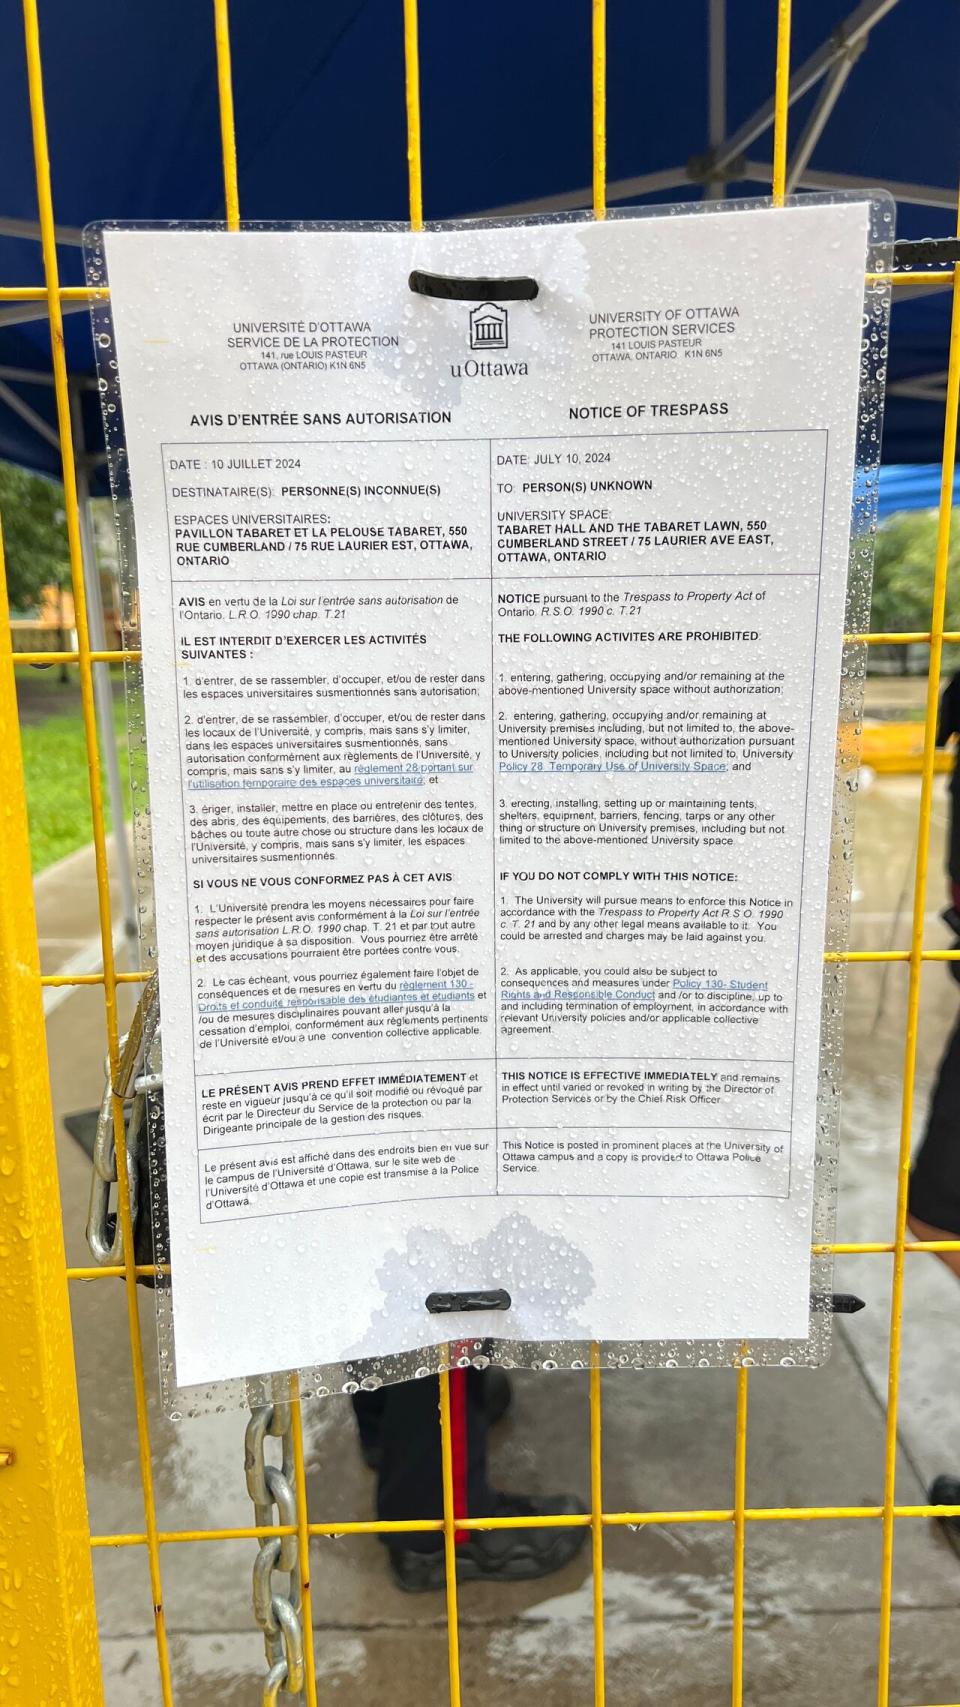 The University of Ottawa posted a notice of trespass for Tabaret Lawn and Tabaret Hall on July 10. 